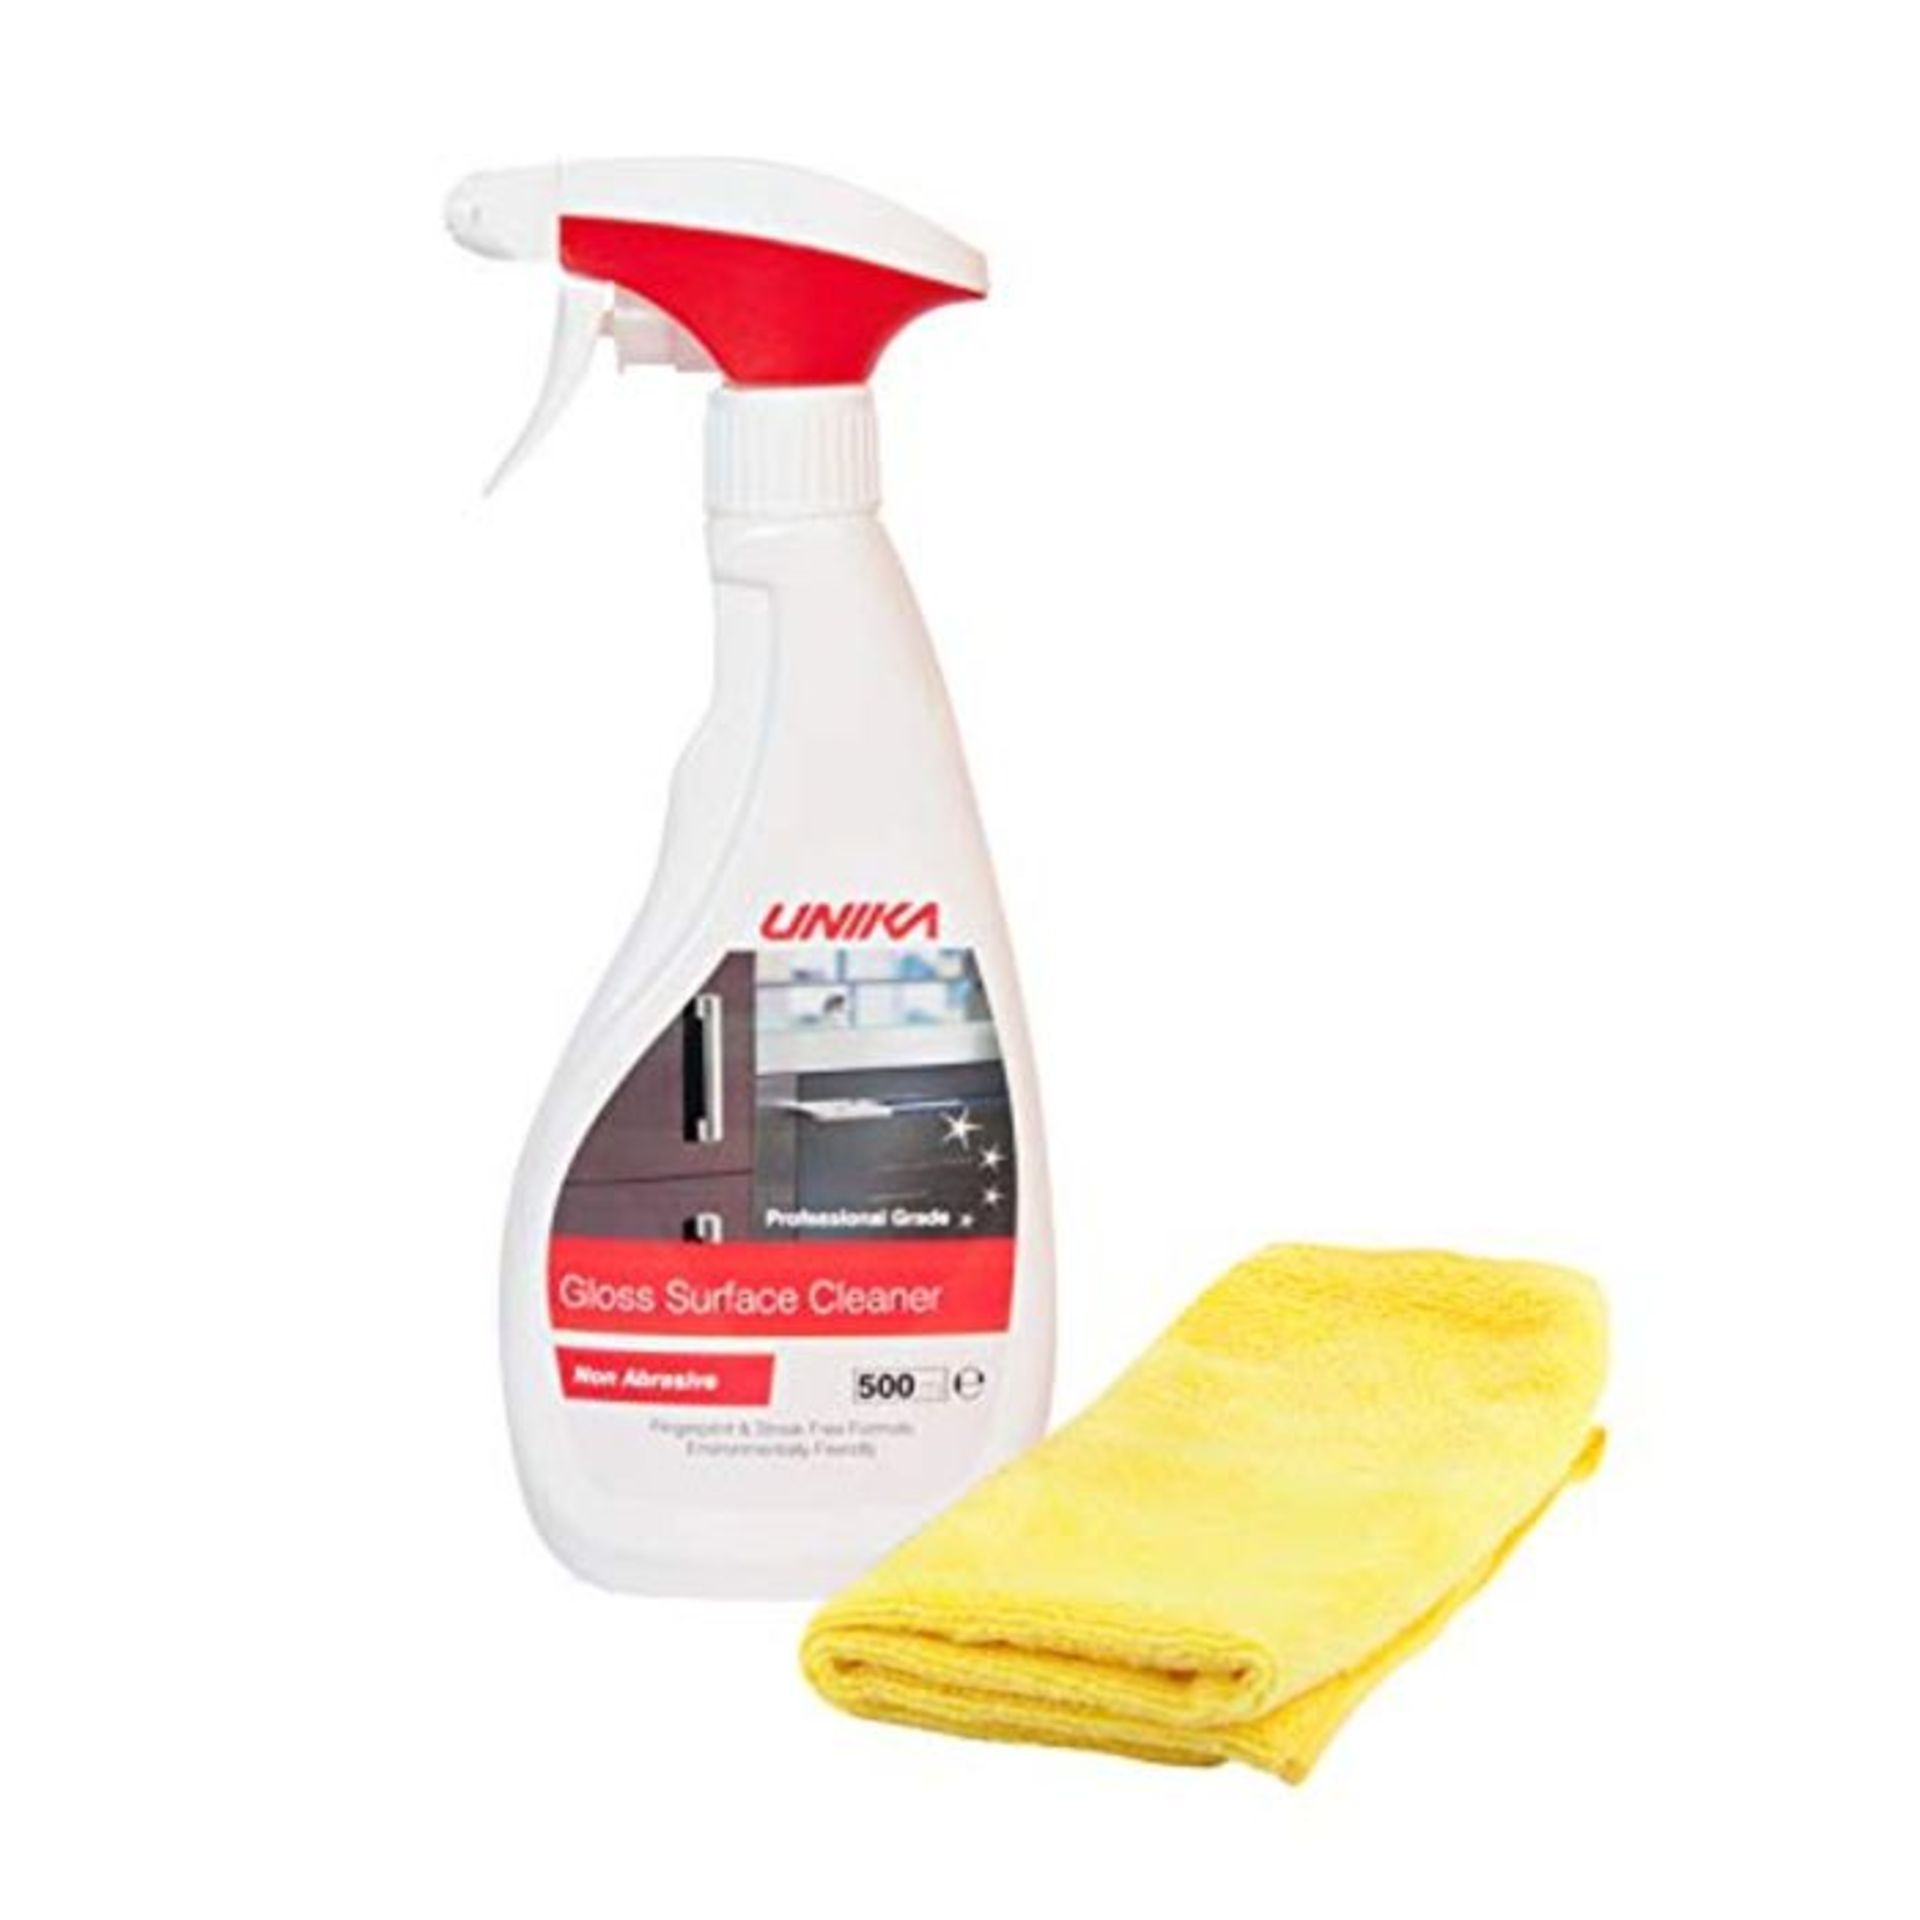 Unika CLEANGLOSSP500 Non-Aerosol Gloss Surface Cleaner & Microfibre Cloth 500ml - Image 3 of 4